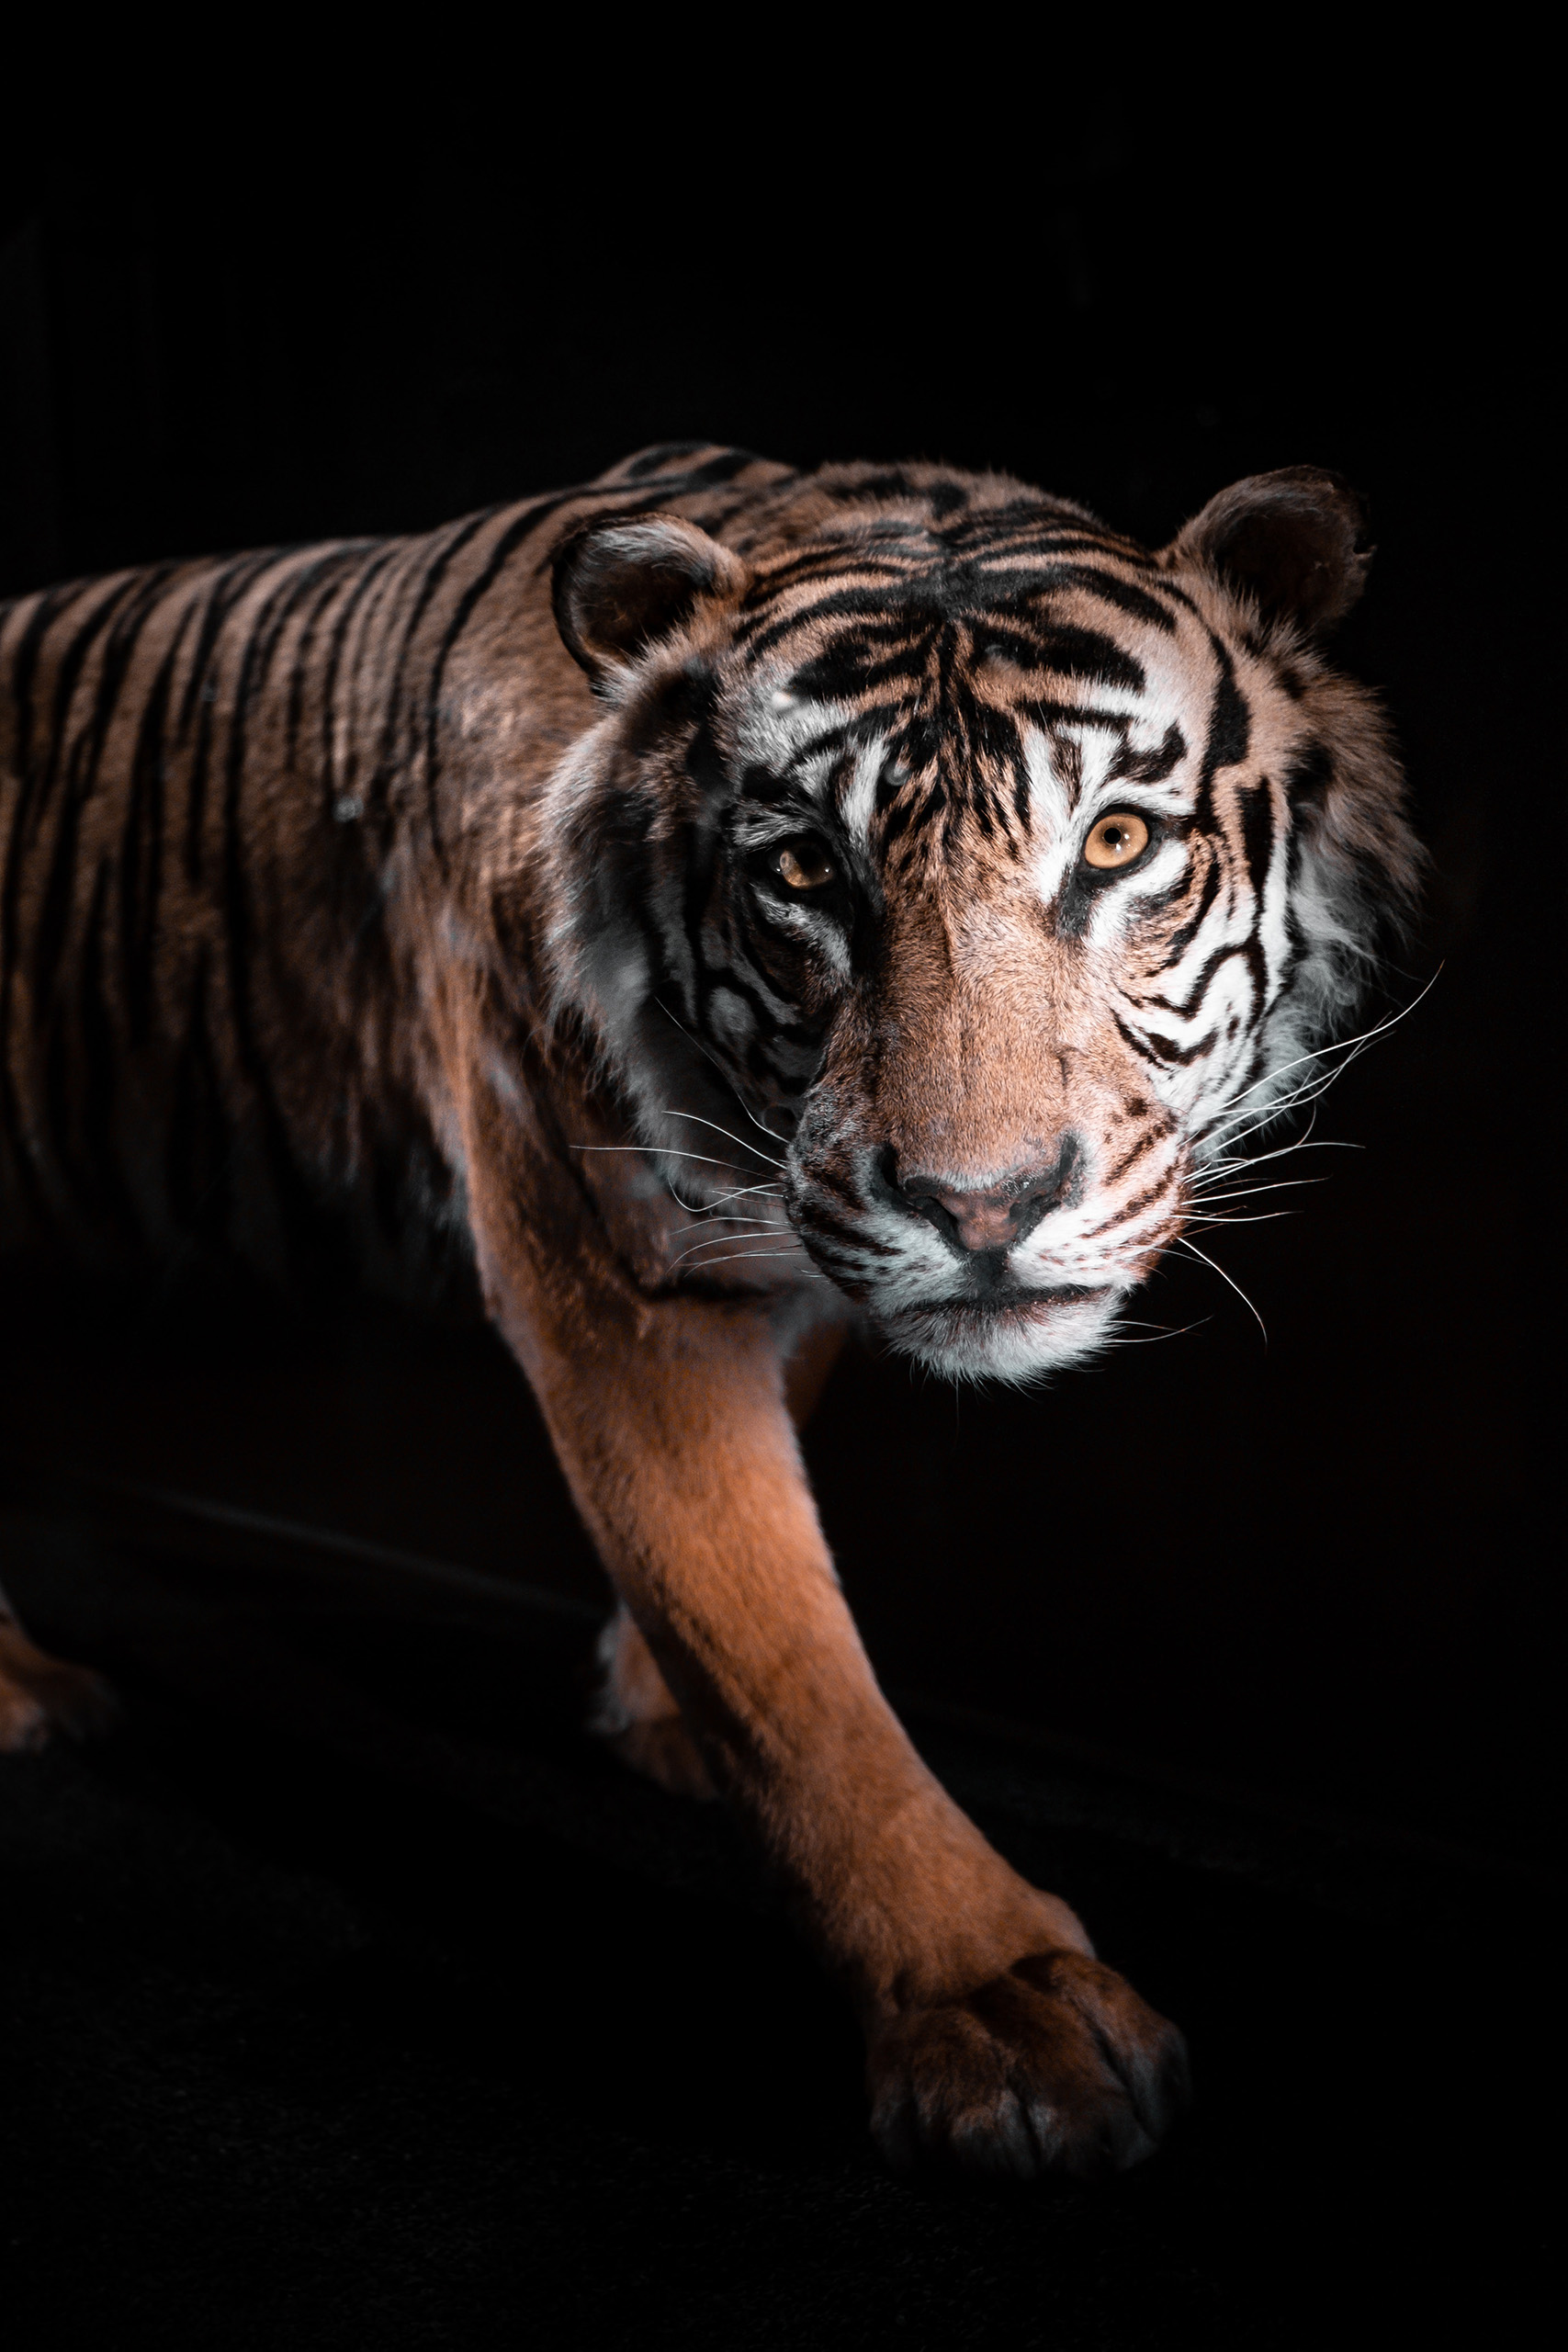 The Year of the Tiger | Danielle Vardaro